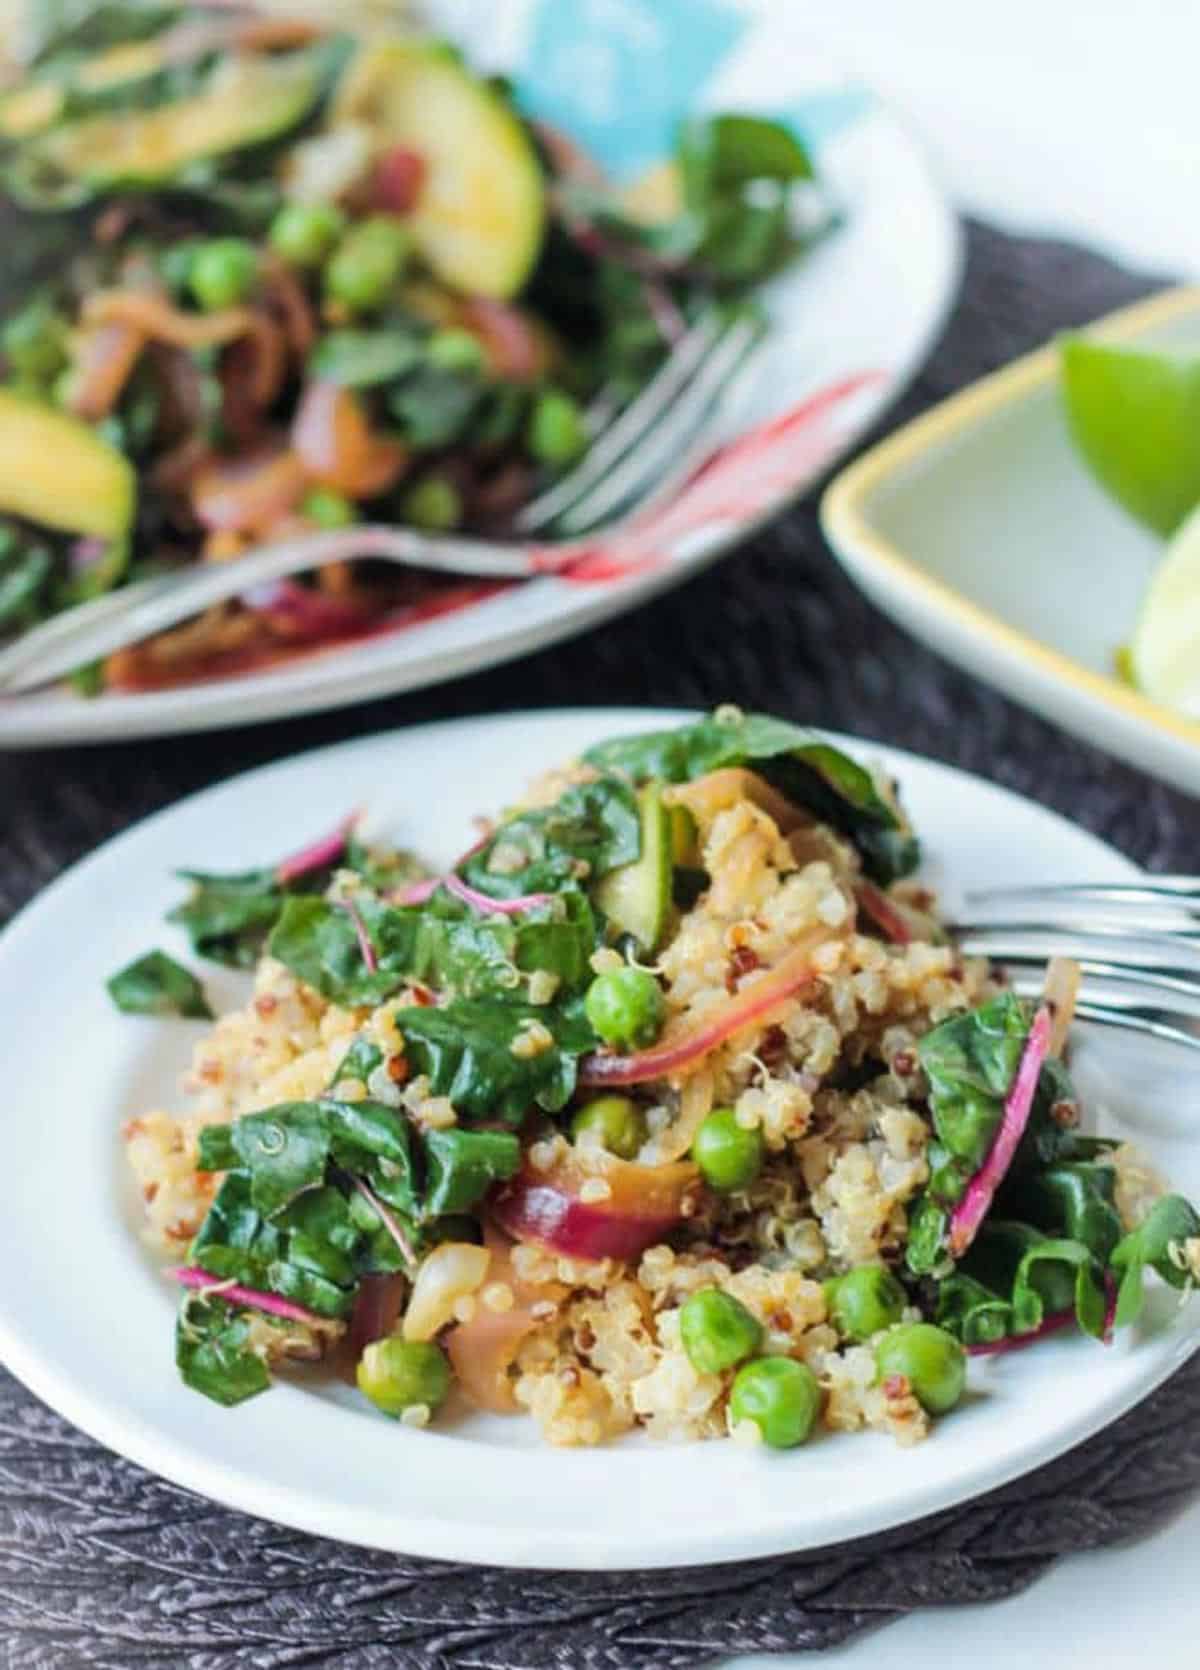 Sautéed chard, peas, zucchini, and onion on top of a cooked white quinoa.